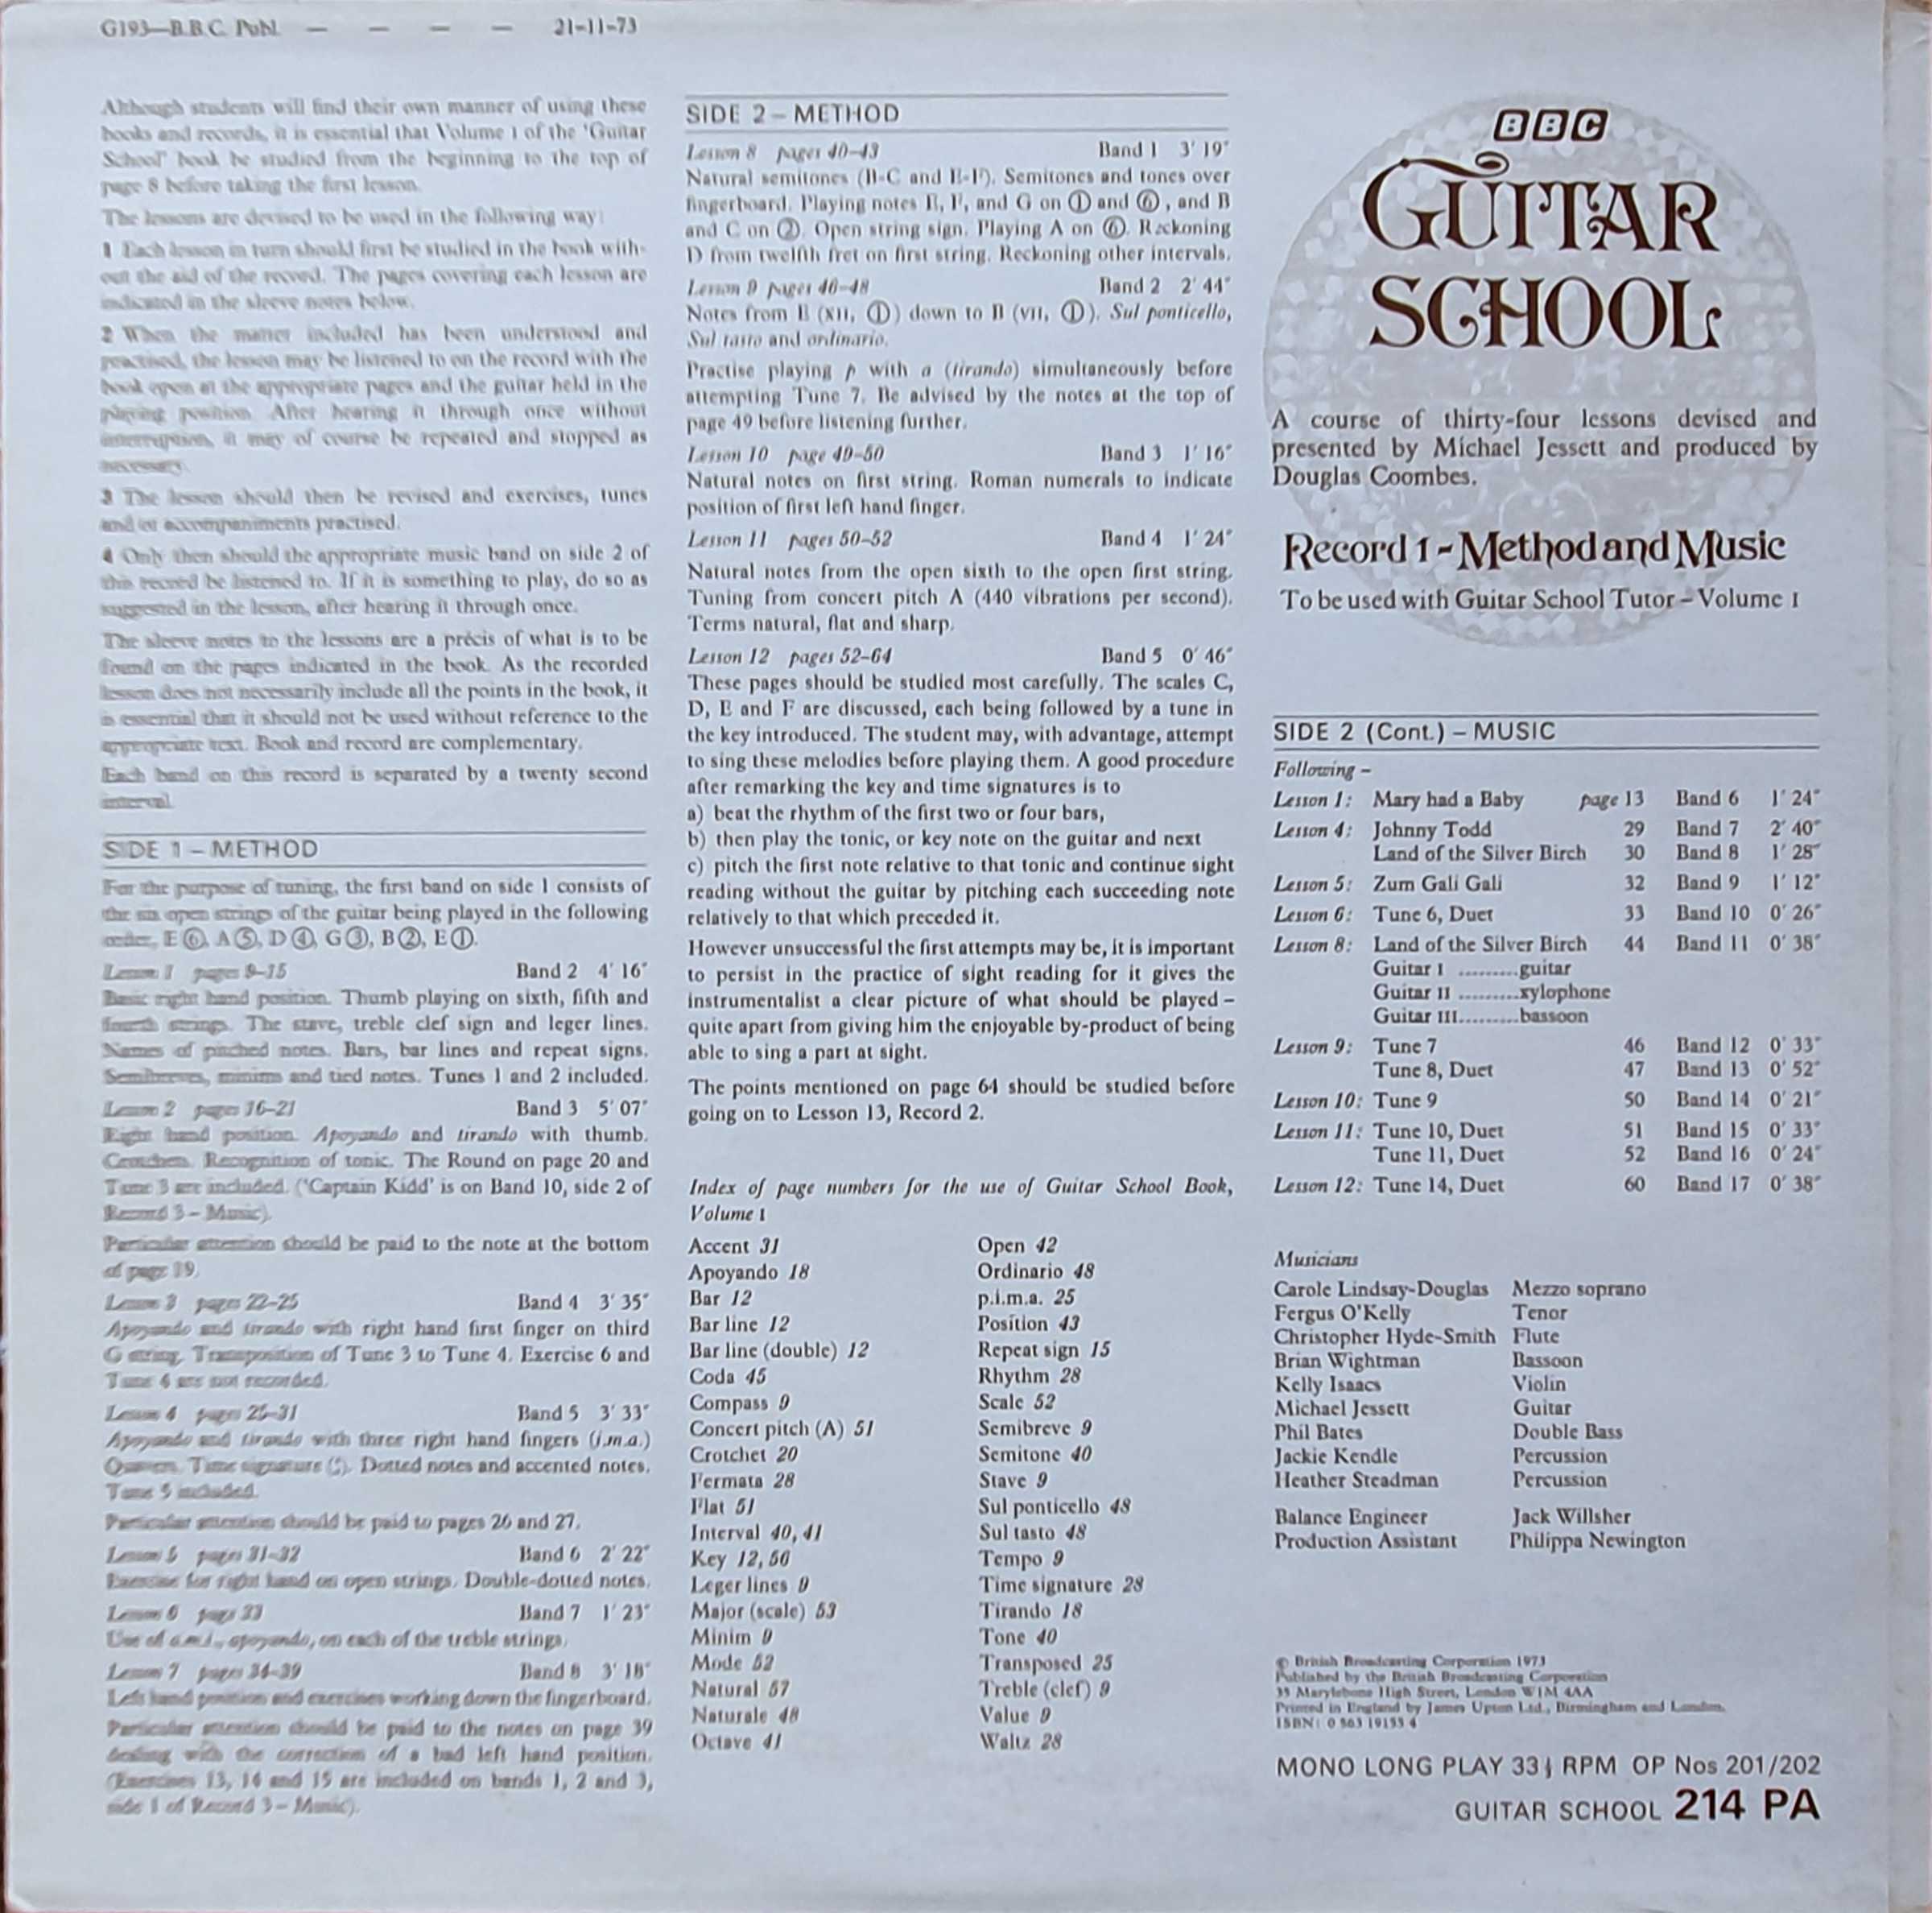 Picture of OP 201/202 Guitar school - Record 1 - Method and music by artist Michael Jessett from the BBC records and Tapes library